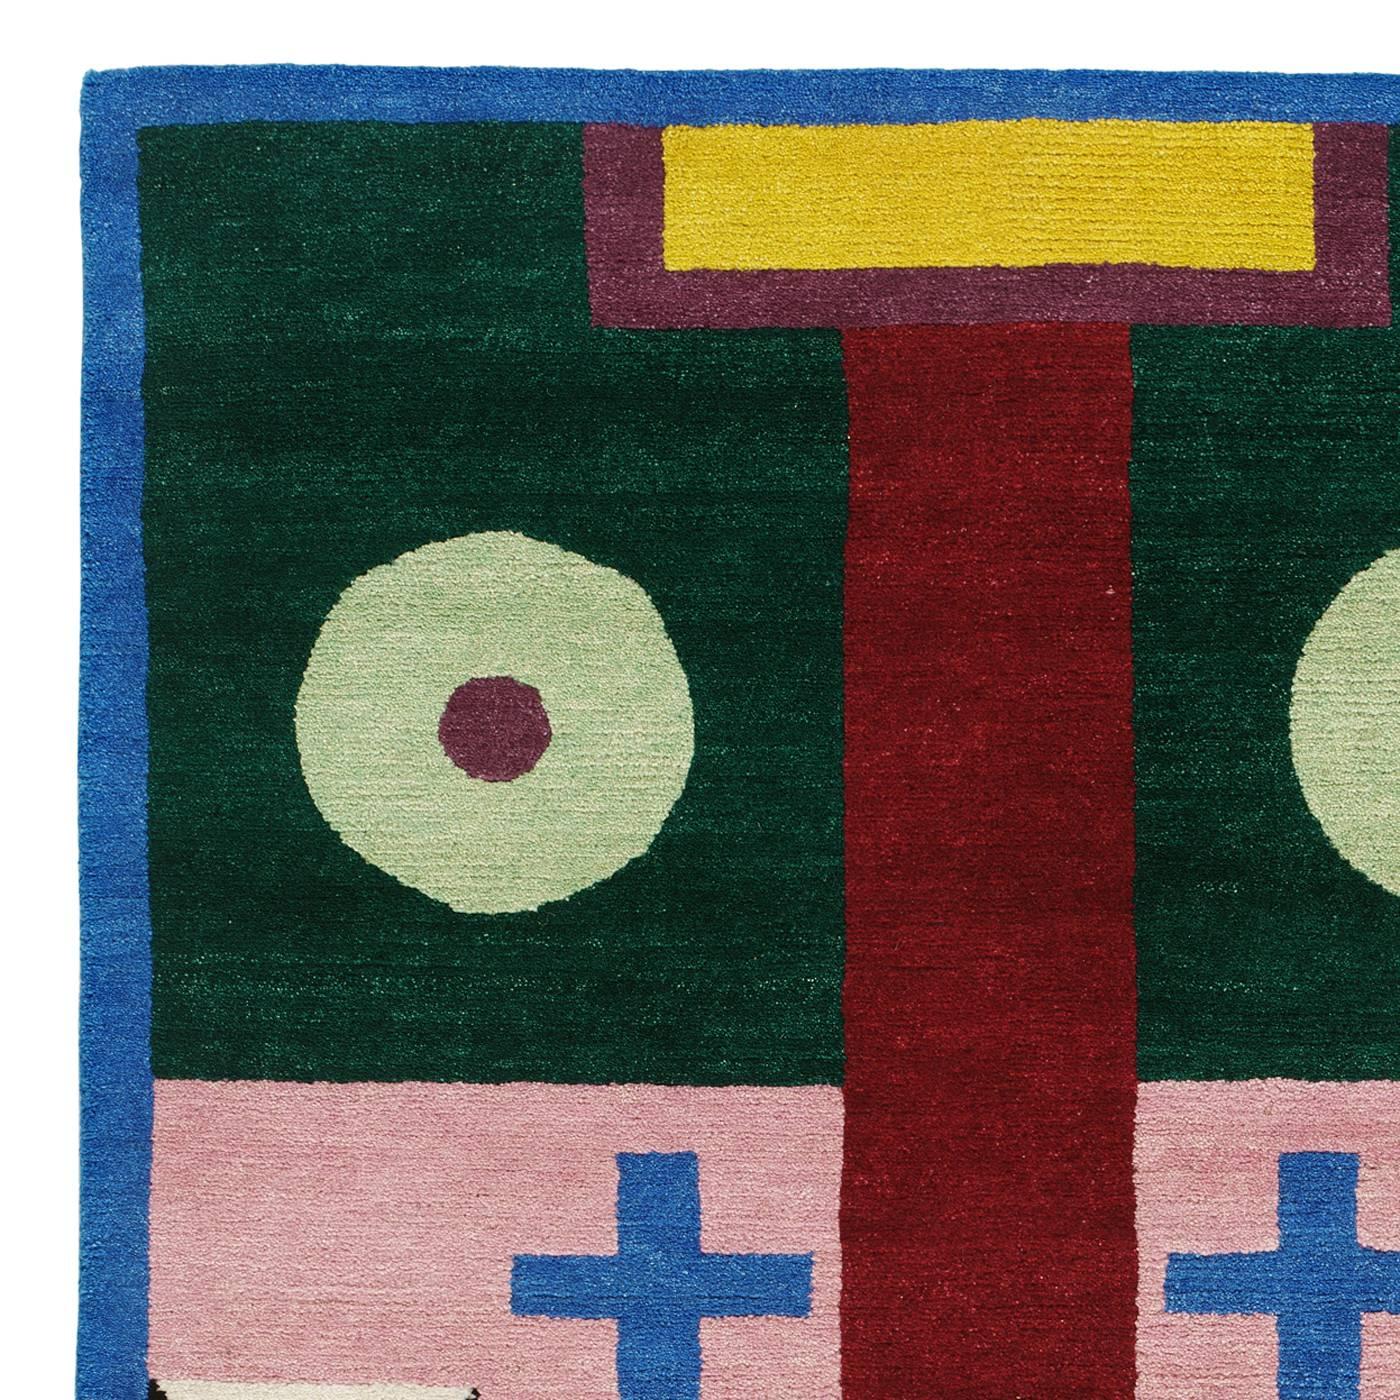 Part of the Post Design collection and one of 36 pieces of this limited series designed by Nathalie Du Pasquier, this carpet was hand knotted by master artisans in Nepal who used Tibetan techniques and Tibetan wool, one of the finest in the world.